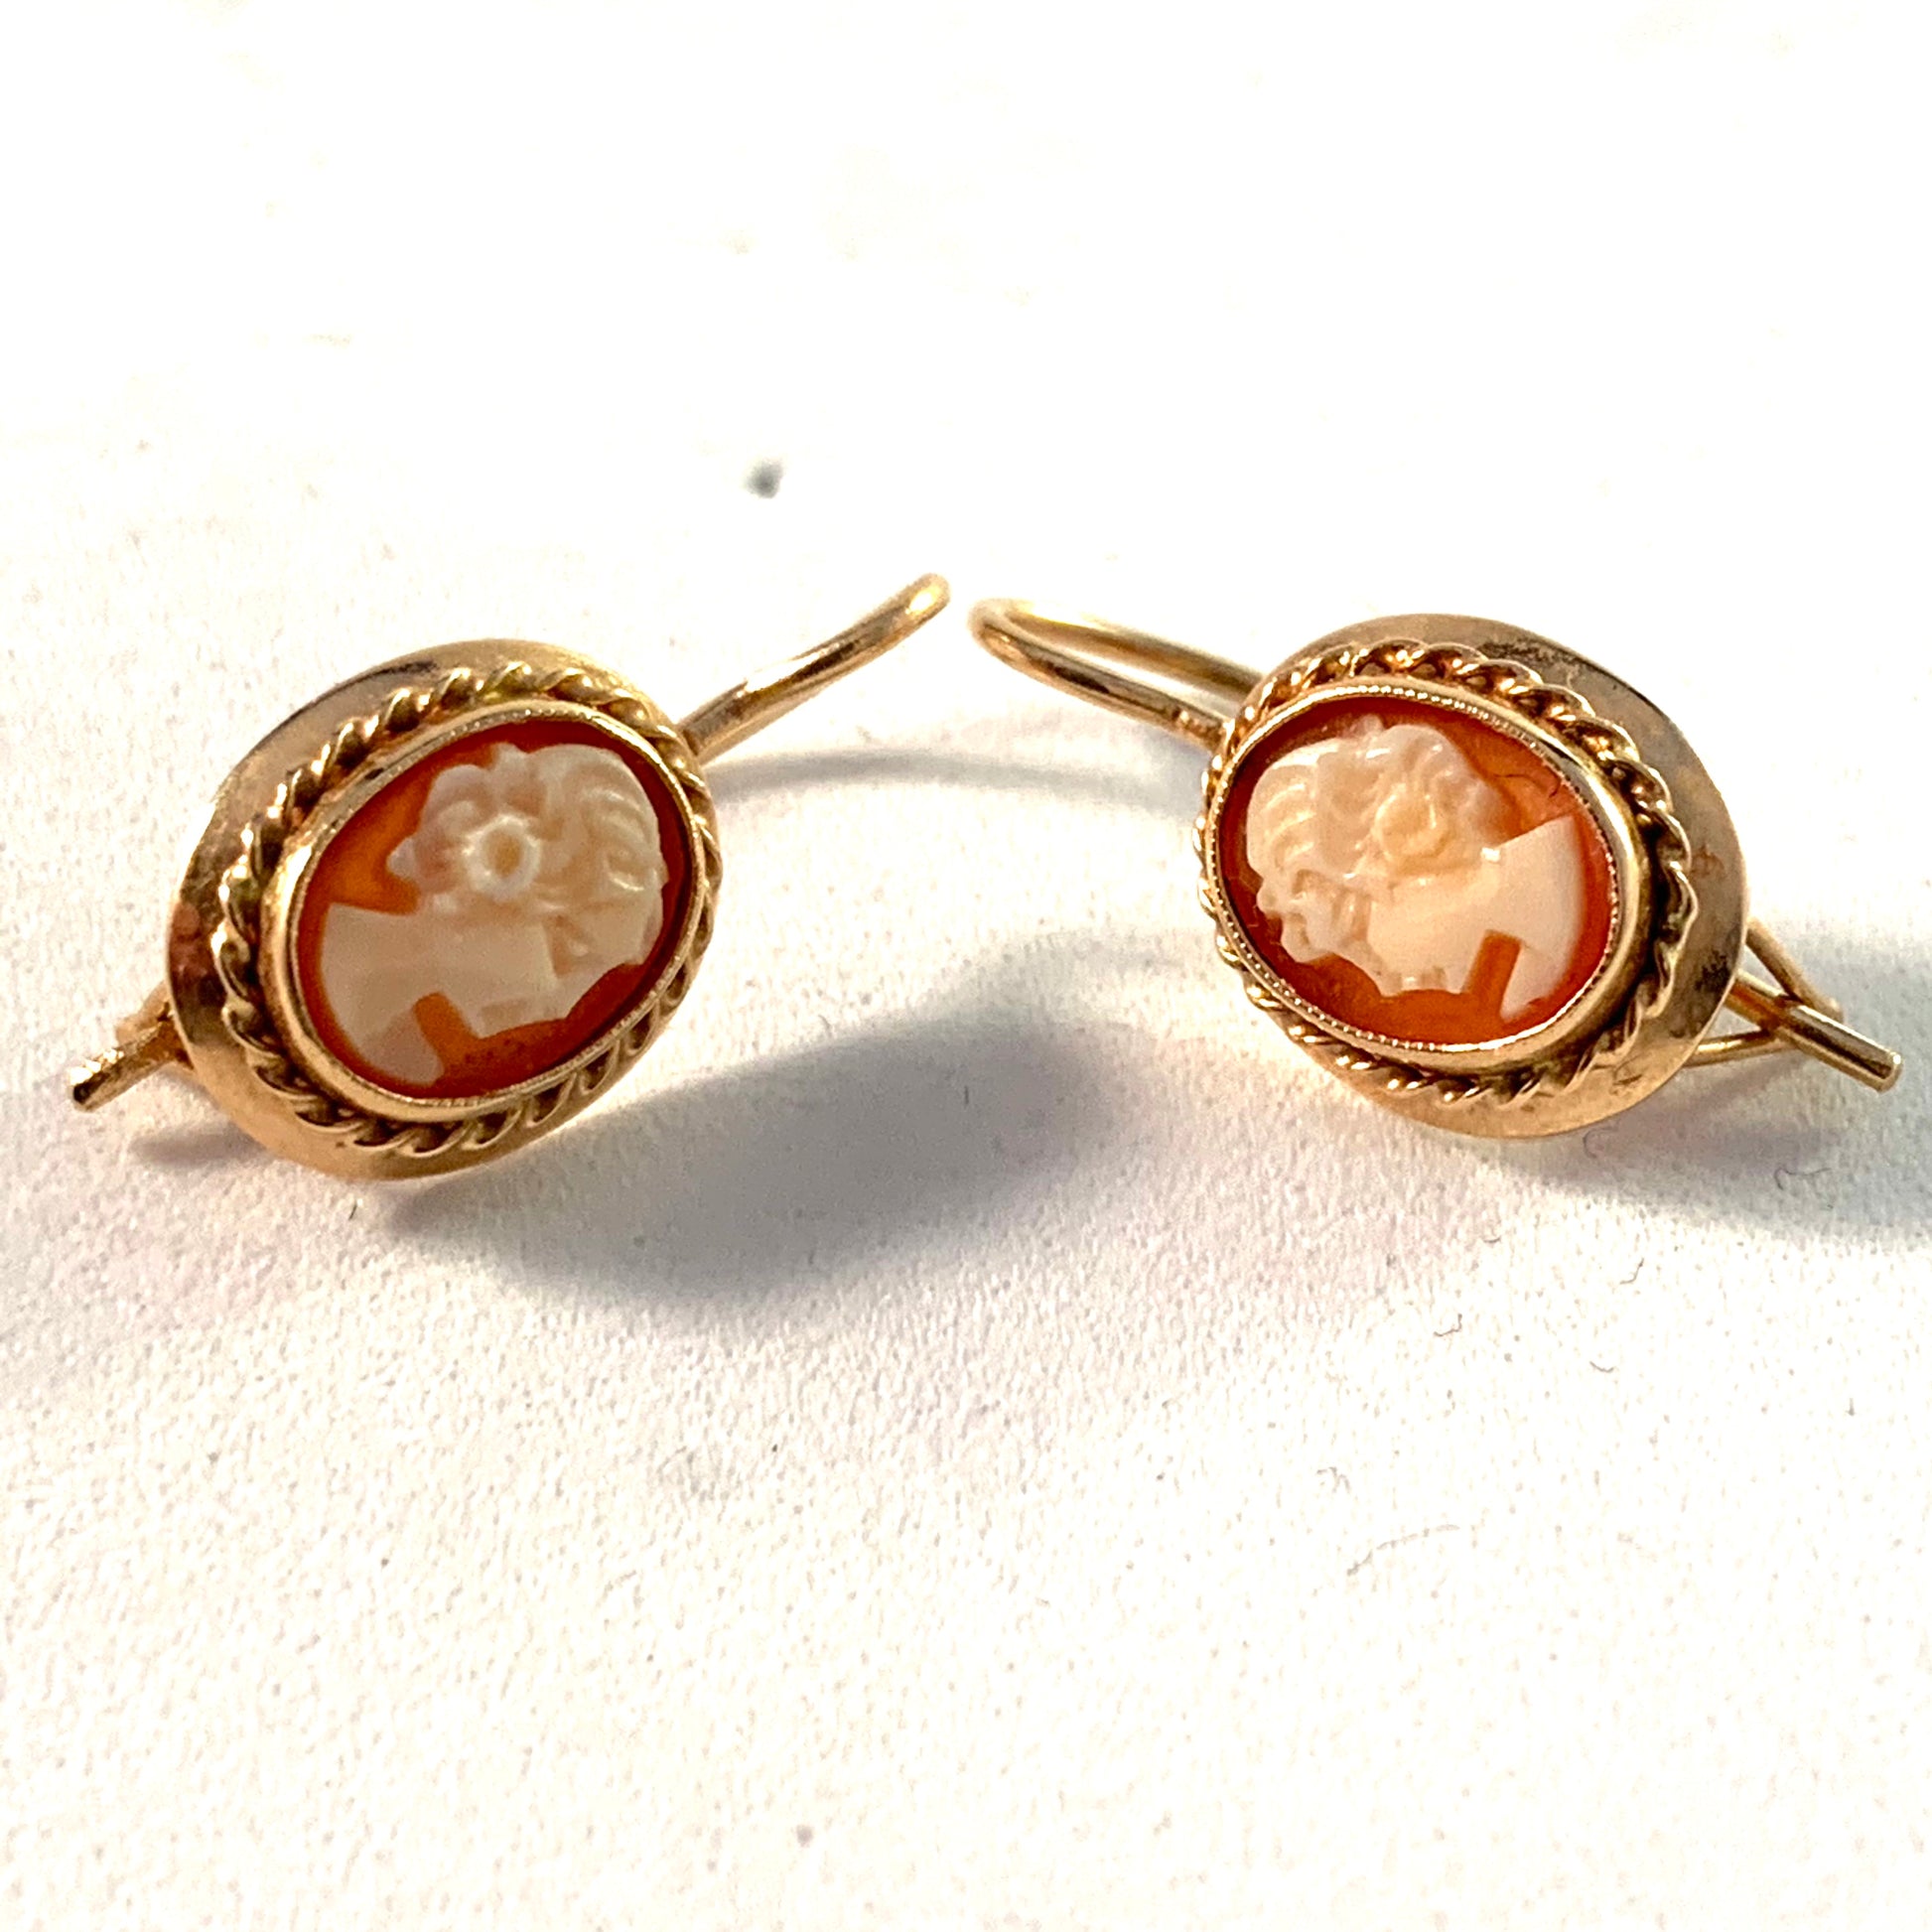 Vintage Mid Century 14k Gold Cameo Earrings.